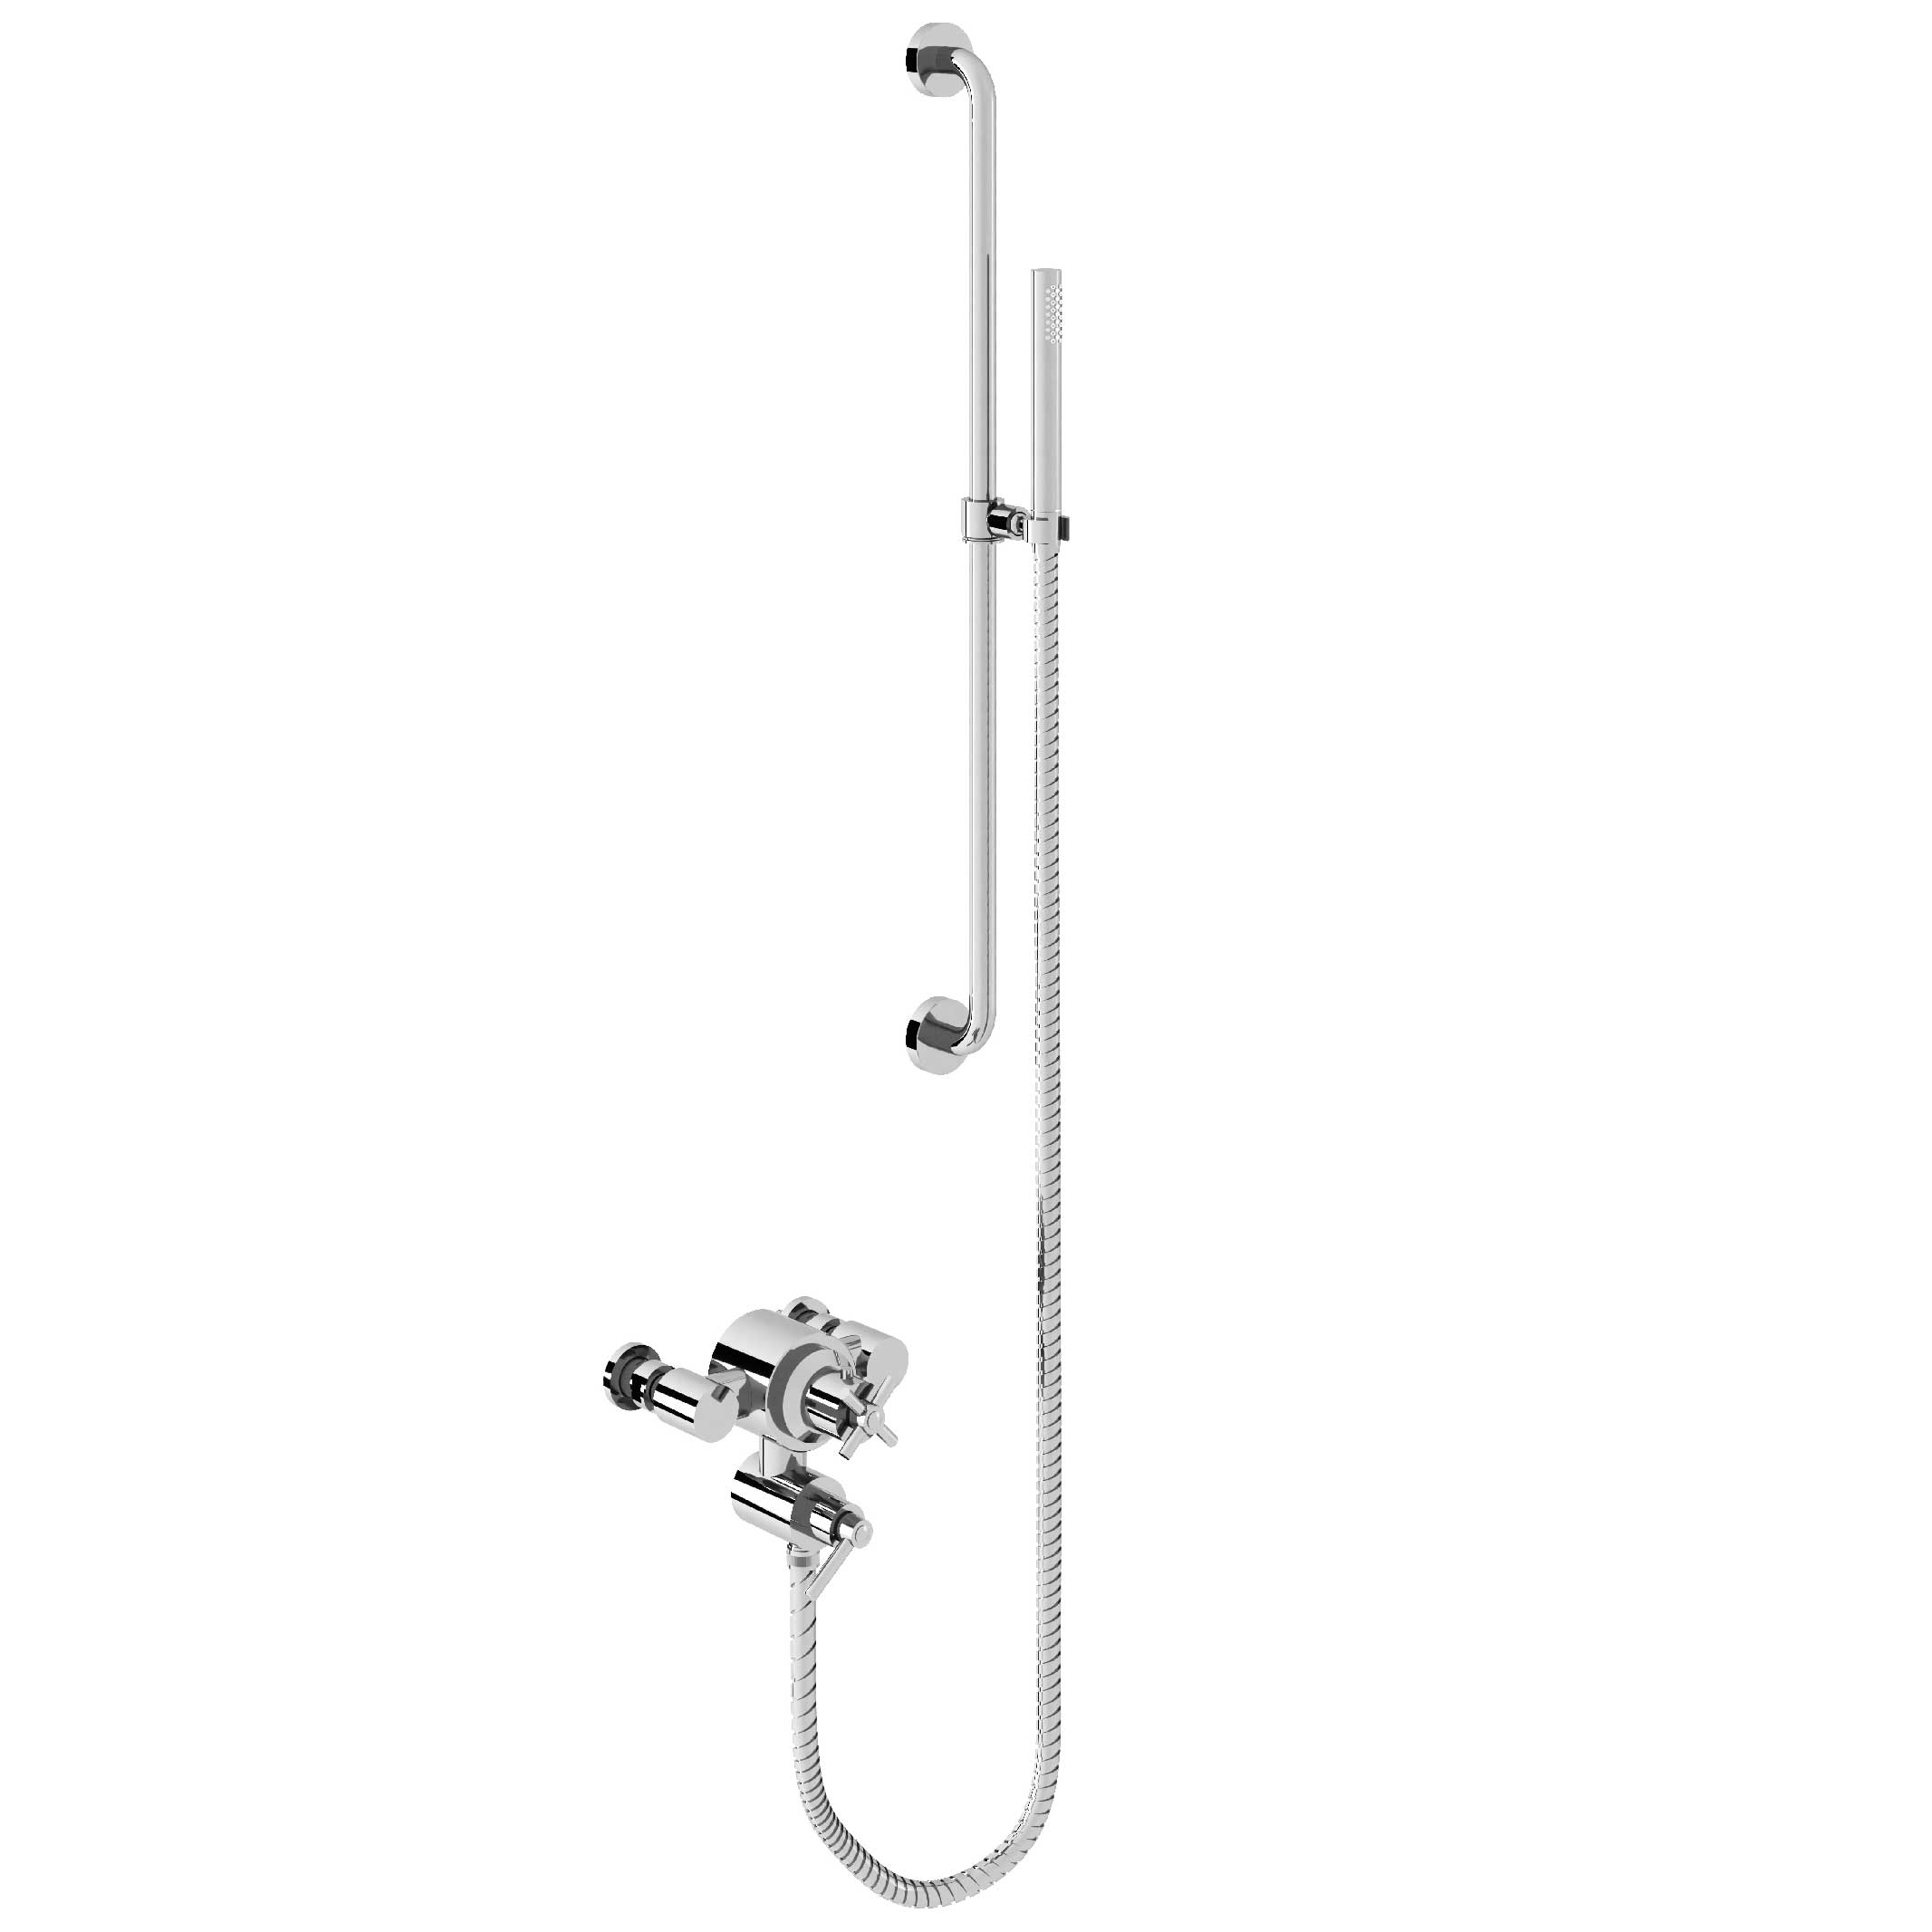 M91-2202T Mitigeur thermo. douche, coulidouche